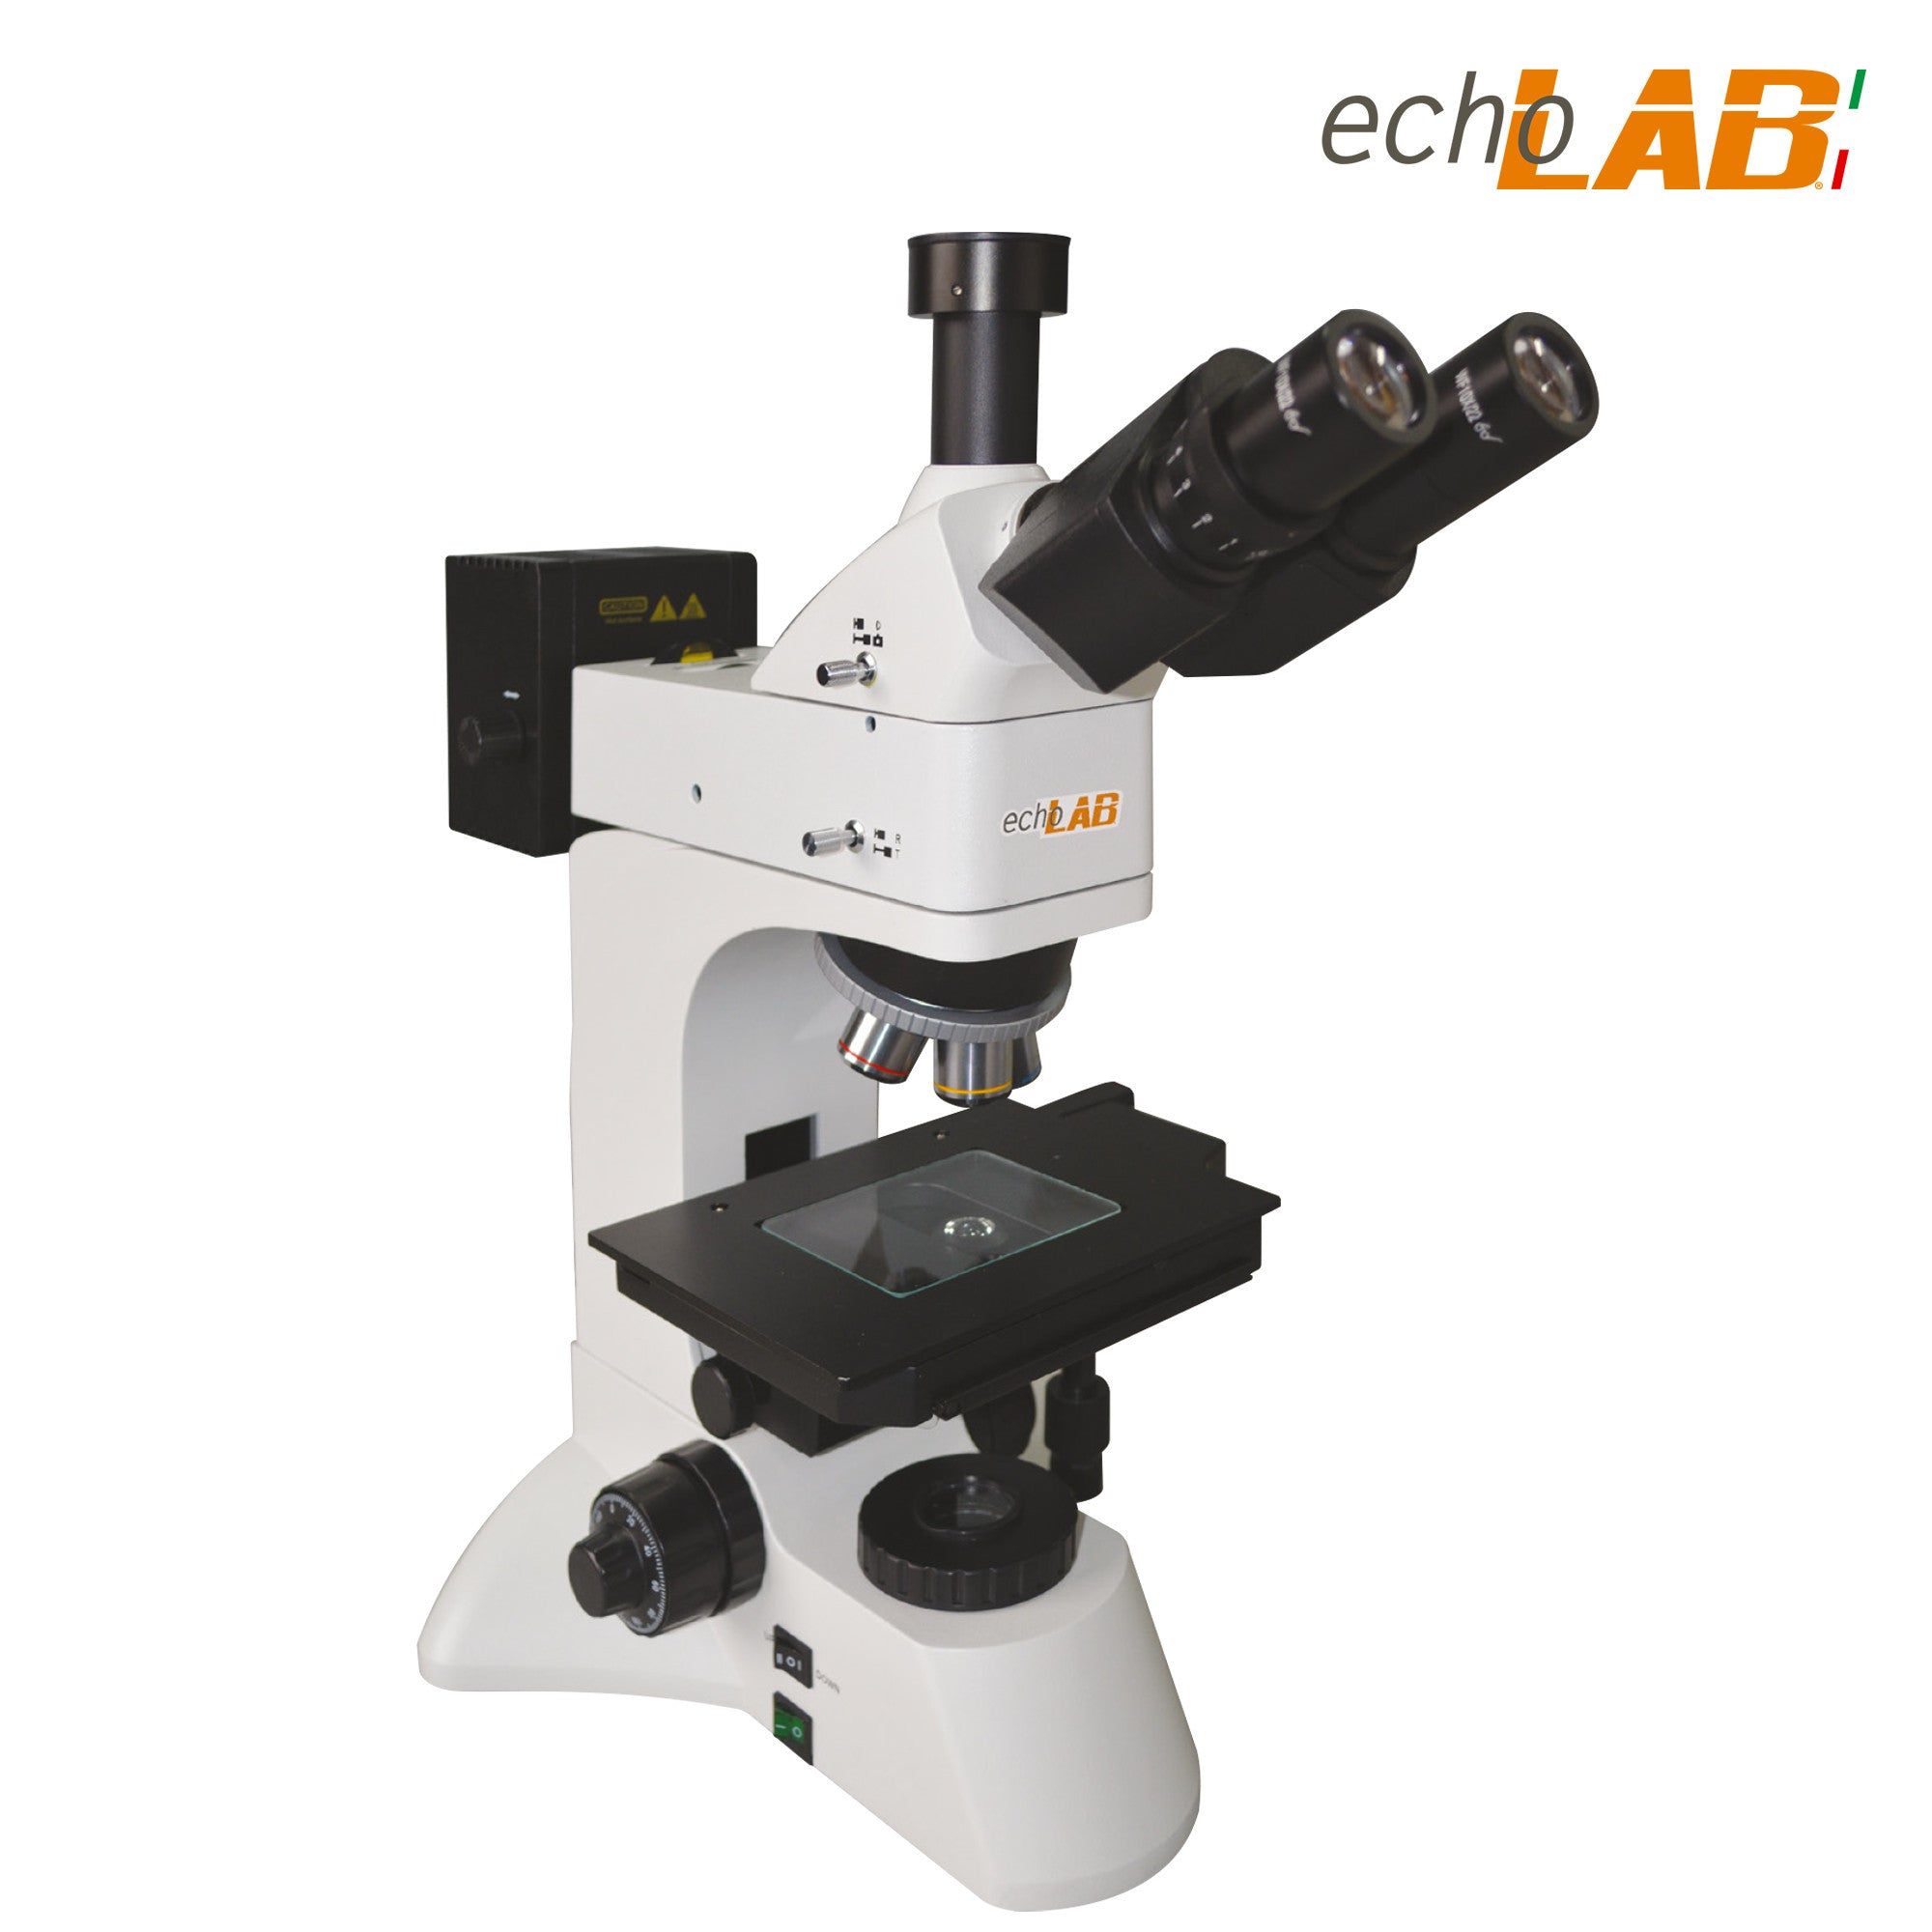 Upright material science microscopes infinity plan achromatic objectives for DIC observation - UM 210 - echoLAB